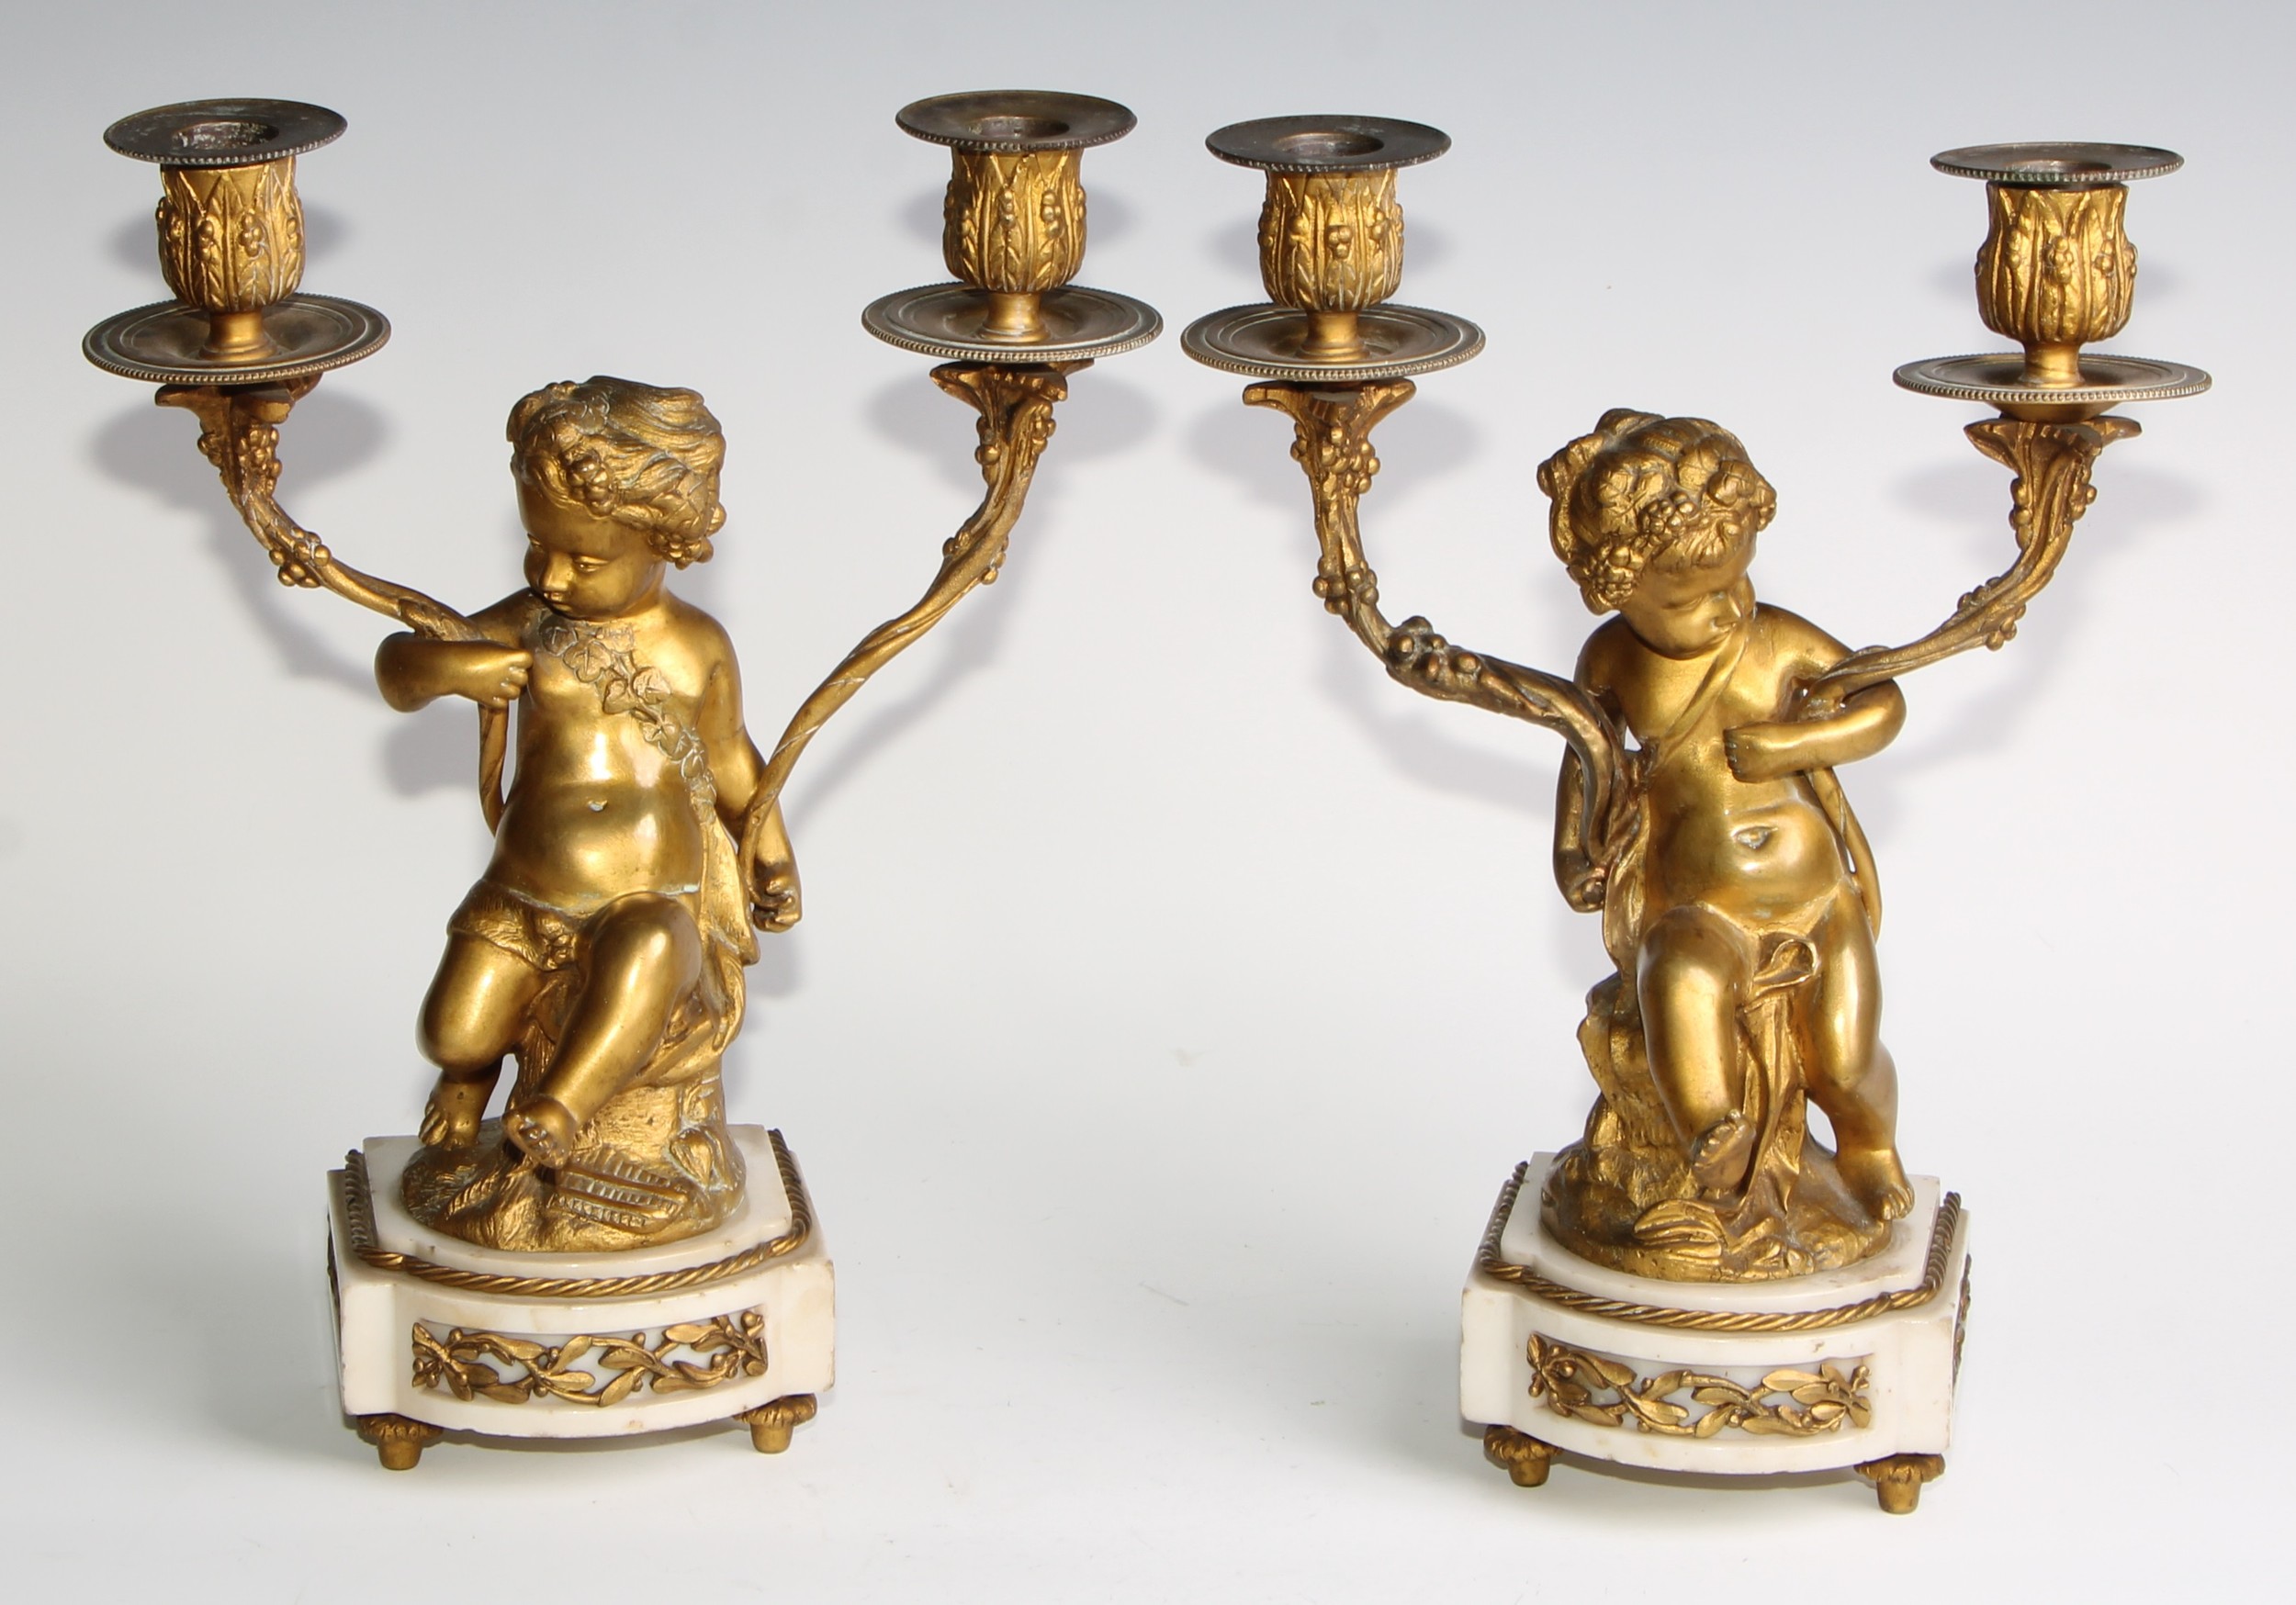 A pair of 19th century French bronze figural two-light candelabra, after Clodion (1738 - 1814), - Image 2 of 12